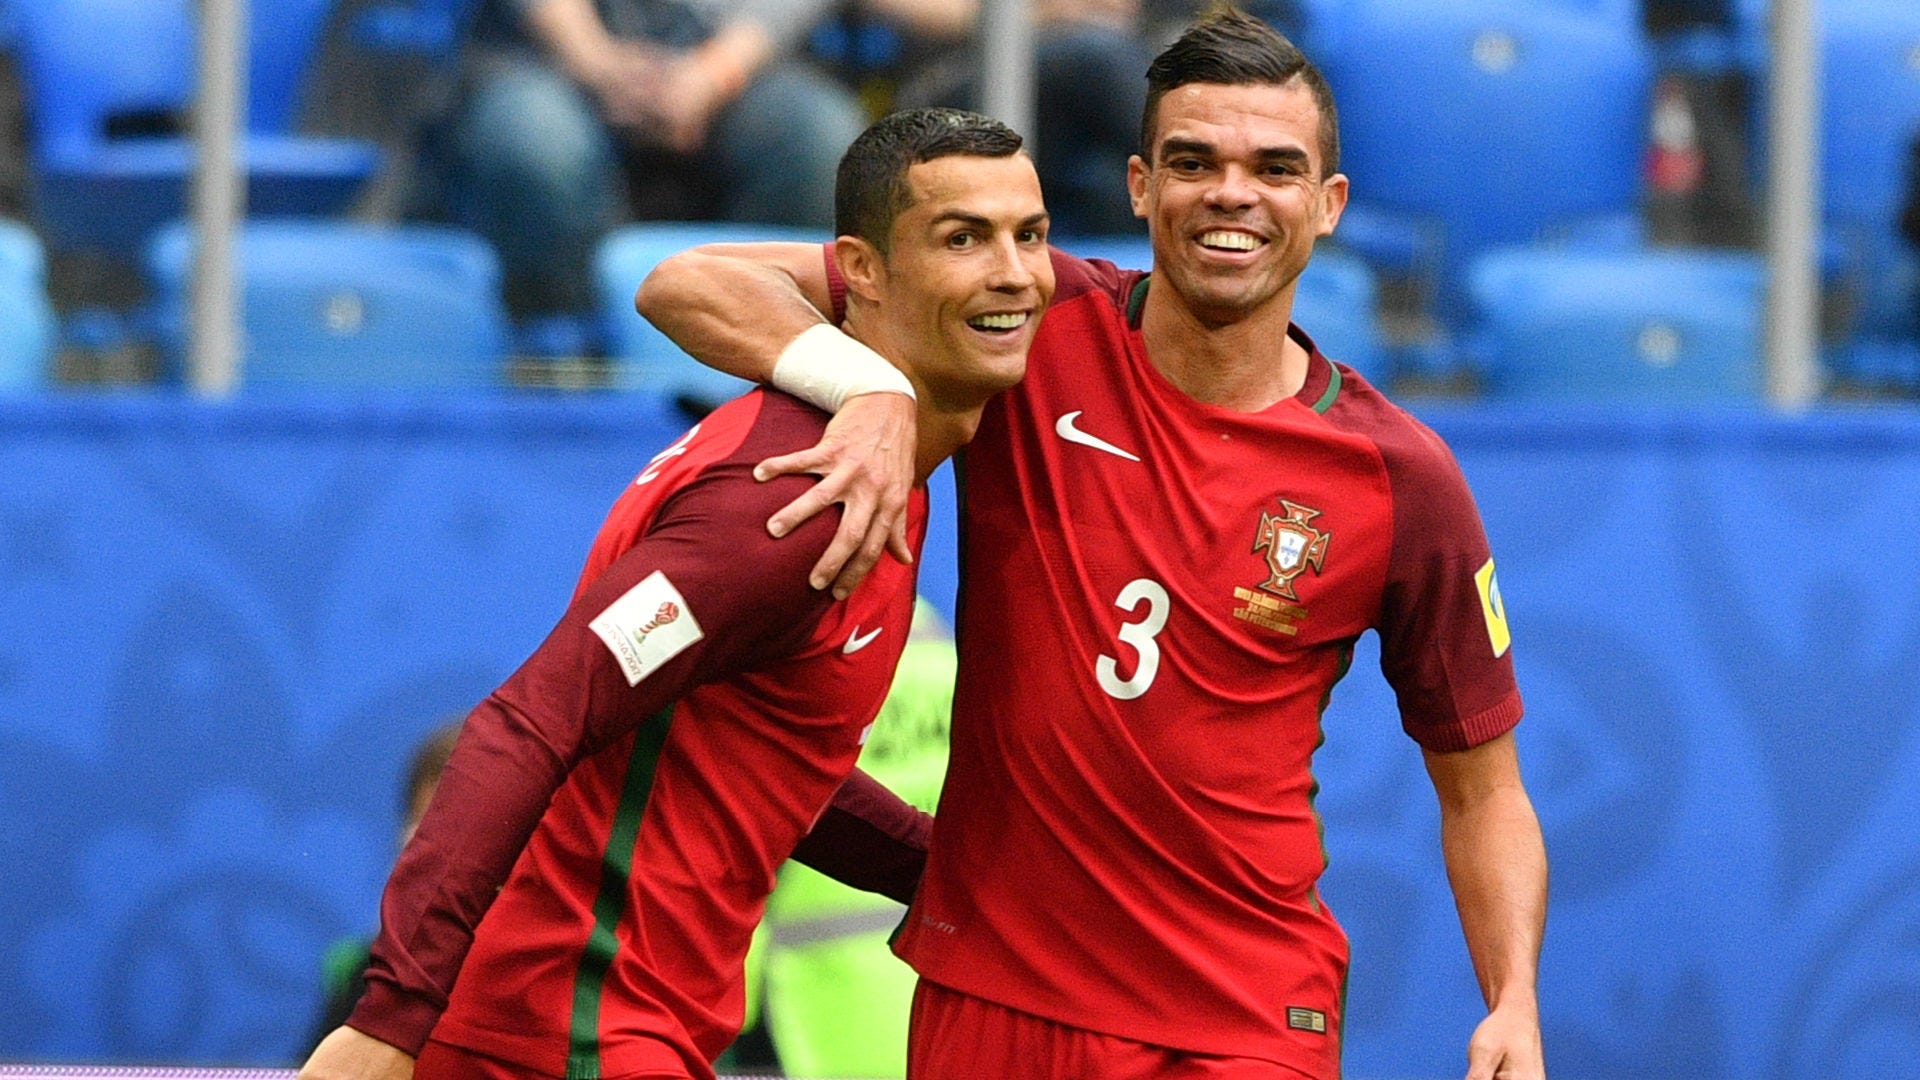 Cristiano Ronaldo is not the biggest player in the World Cup, there are 6 players older than the Portuguese